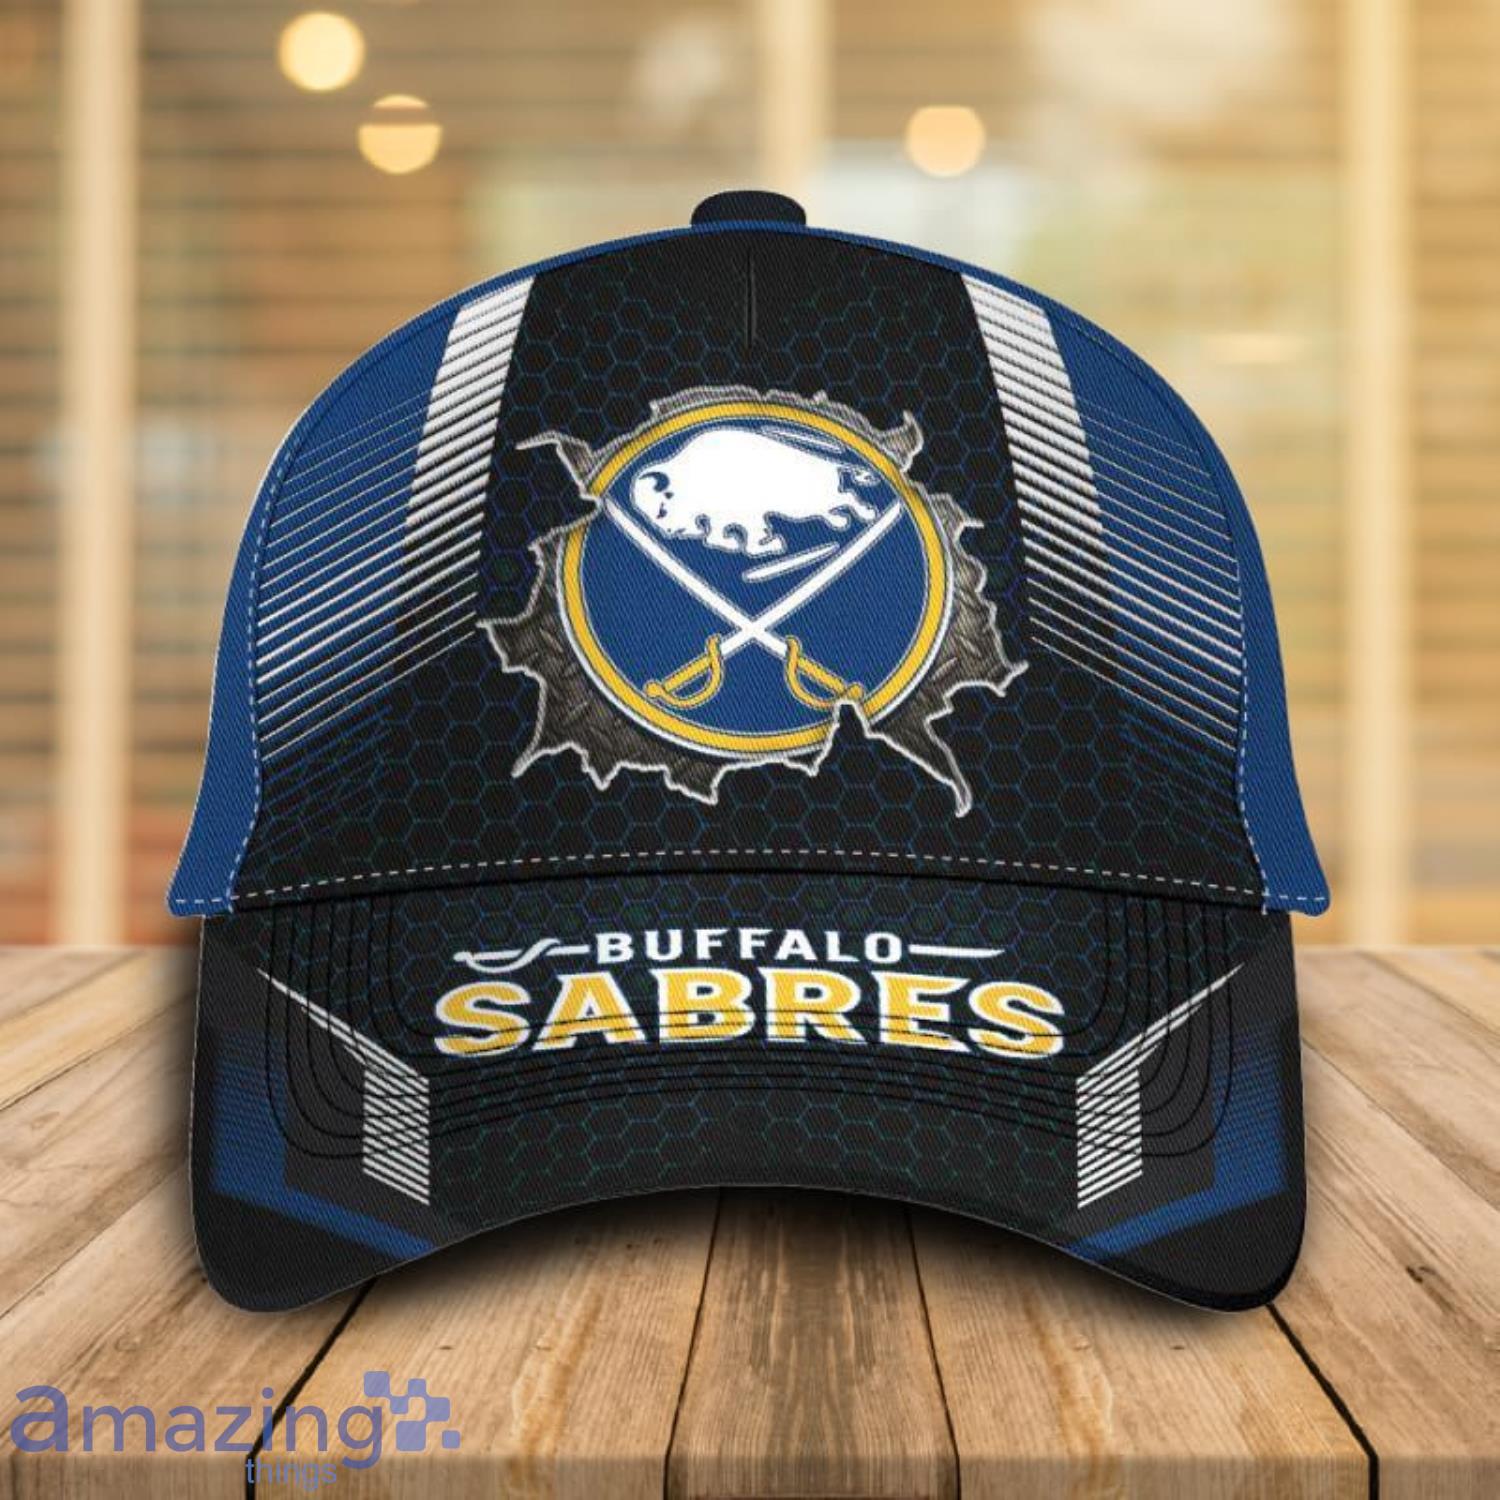 Buffalo Sabres on X: We can't wait to see your